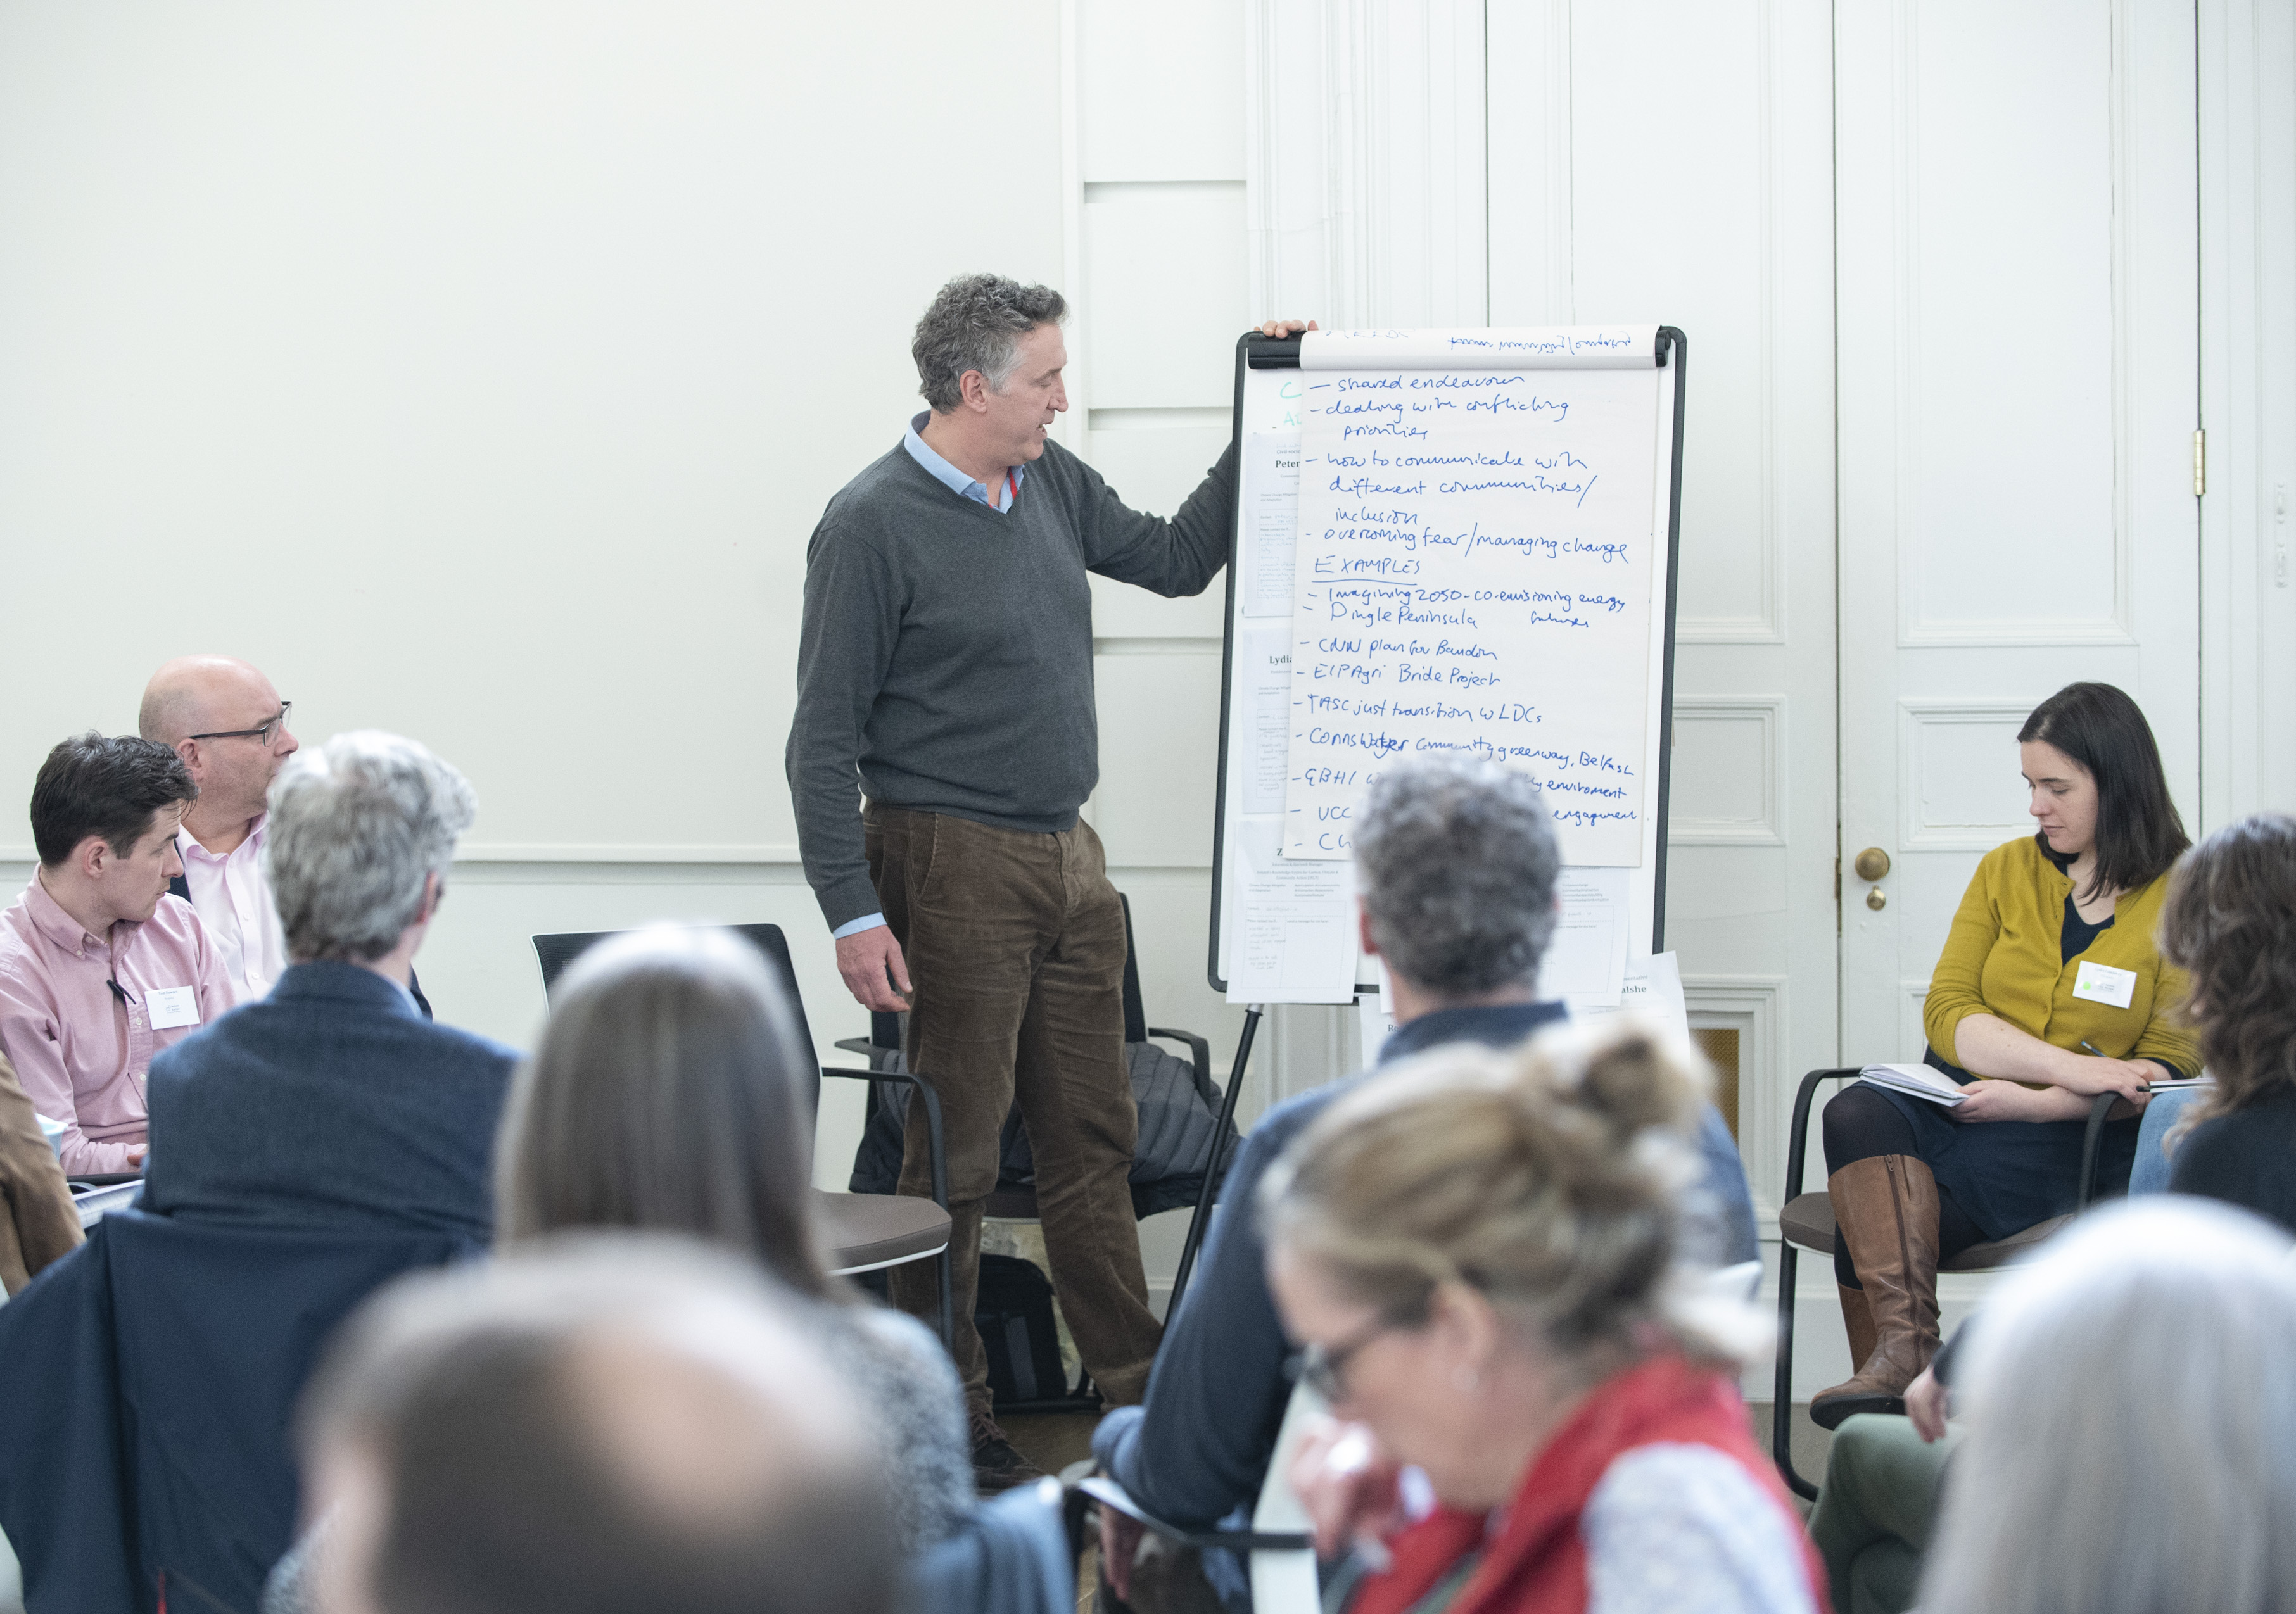 Photography by Ger McCarthy: Paul Medway, Climate Action Officer, Cork City Council shares highlights from group discussion